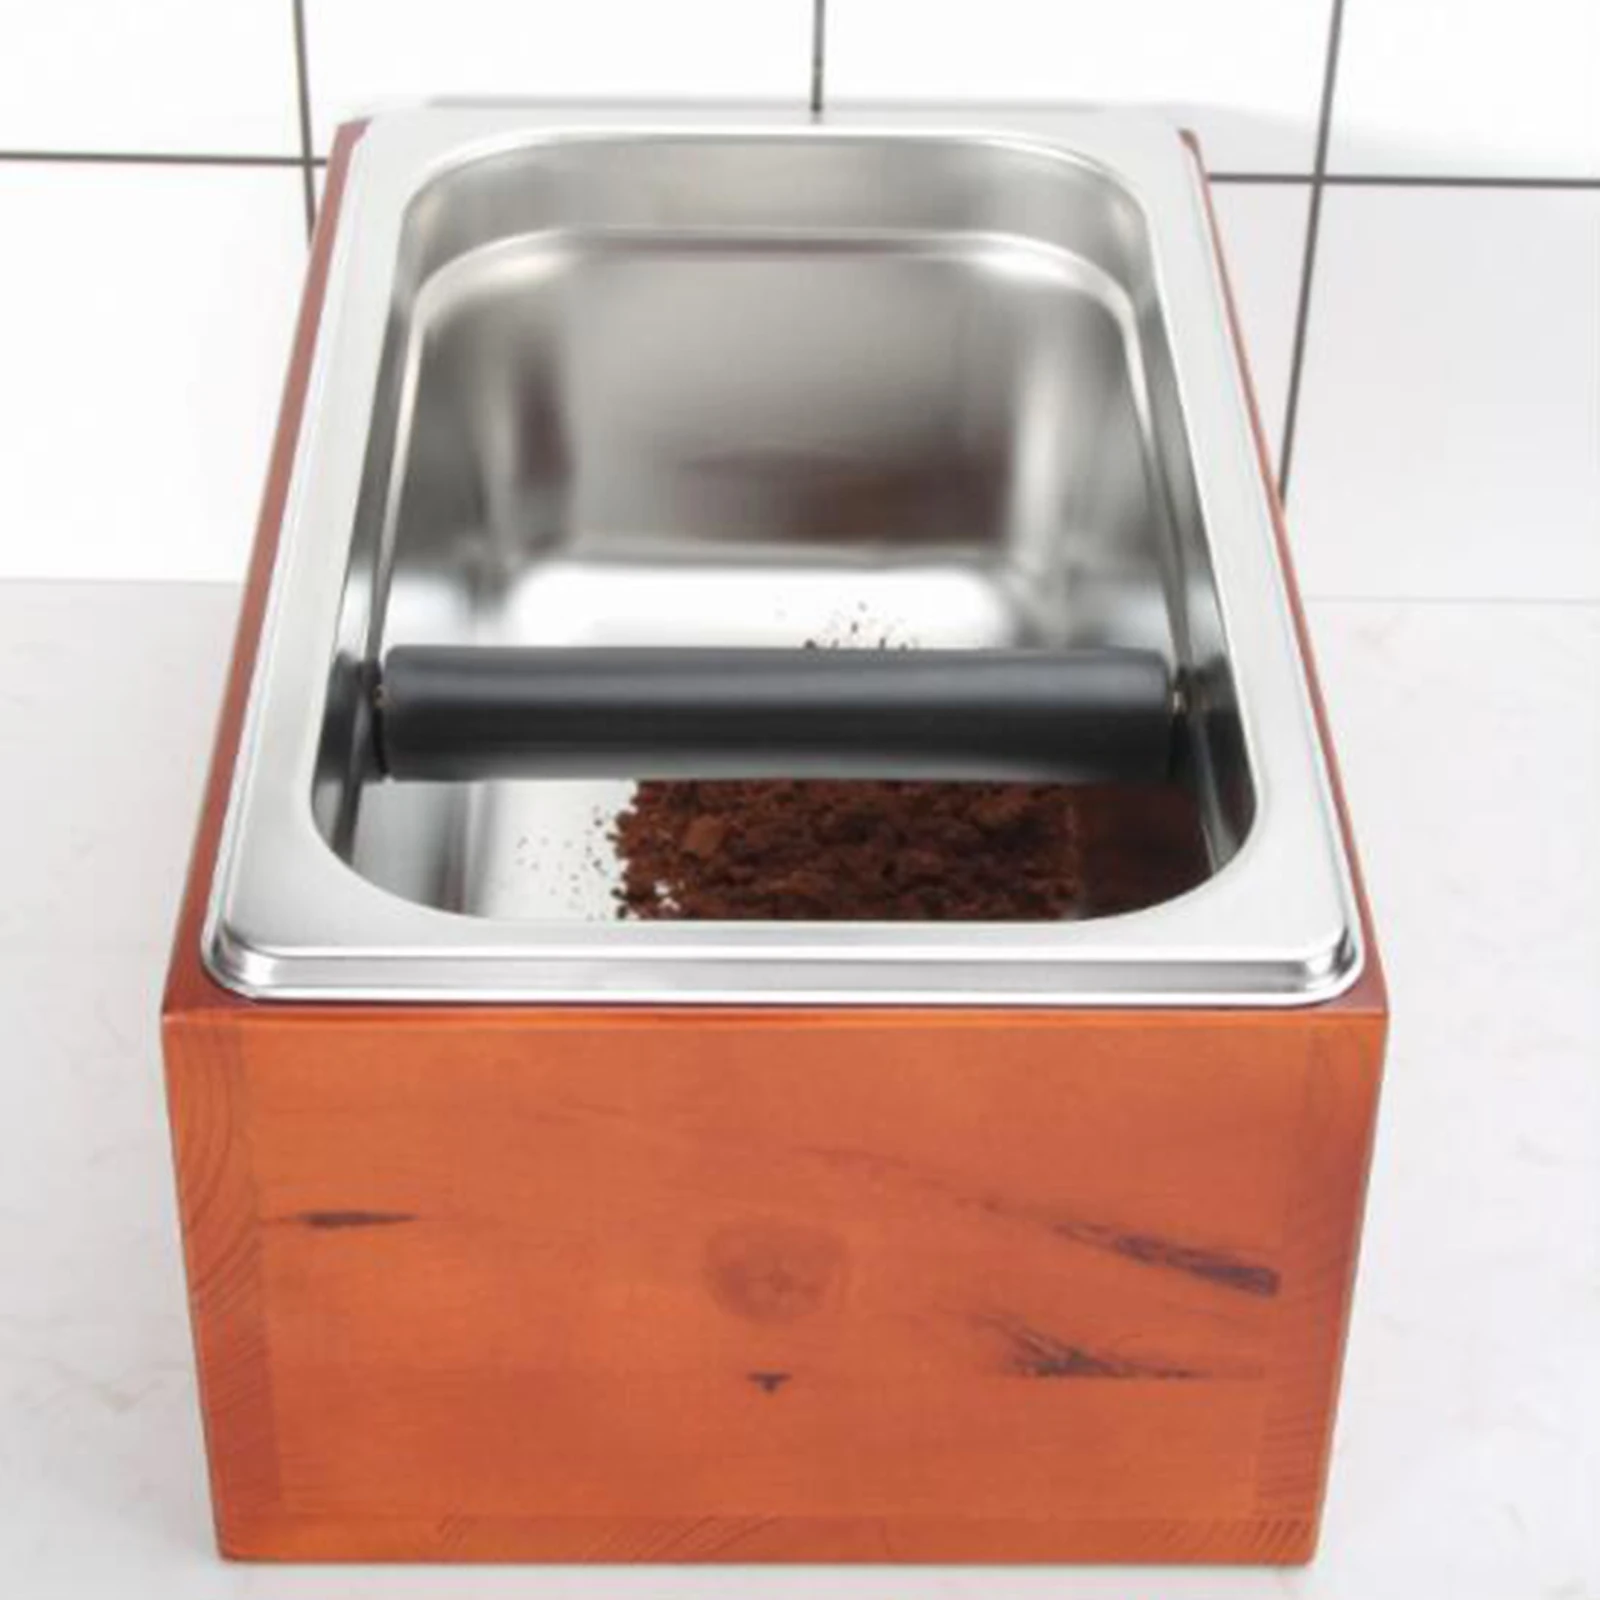 Coffee Knock Box Stainless Steel Non-Slip Solid Wood Base Compact Durable Coffee Ground Knock Container for Home